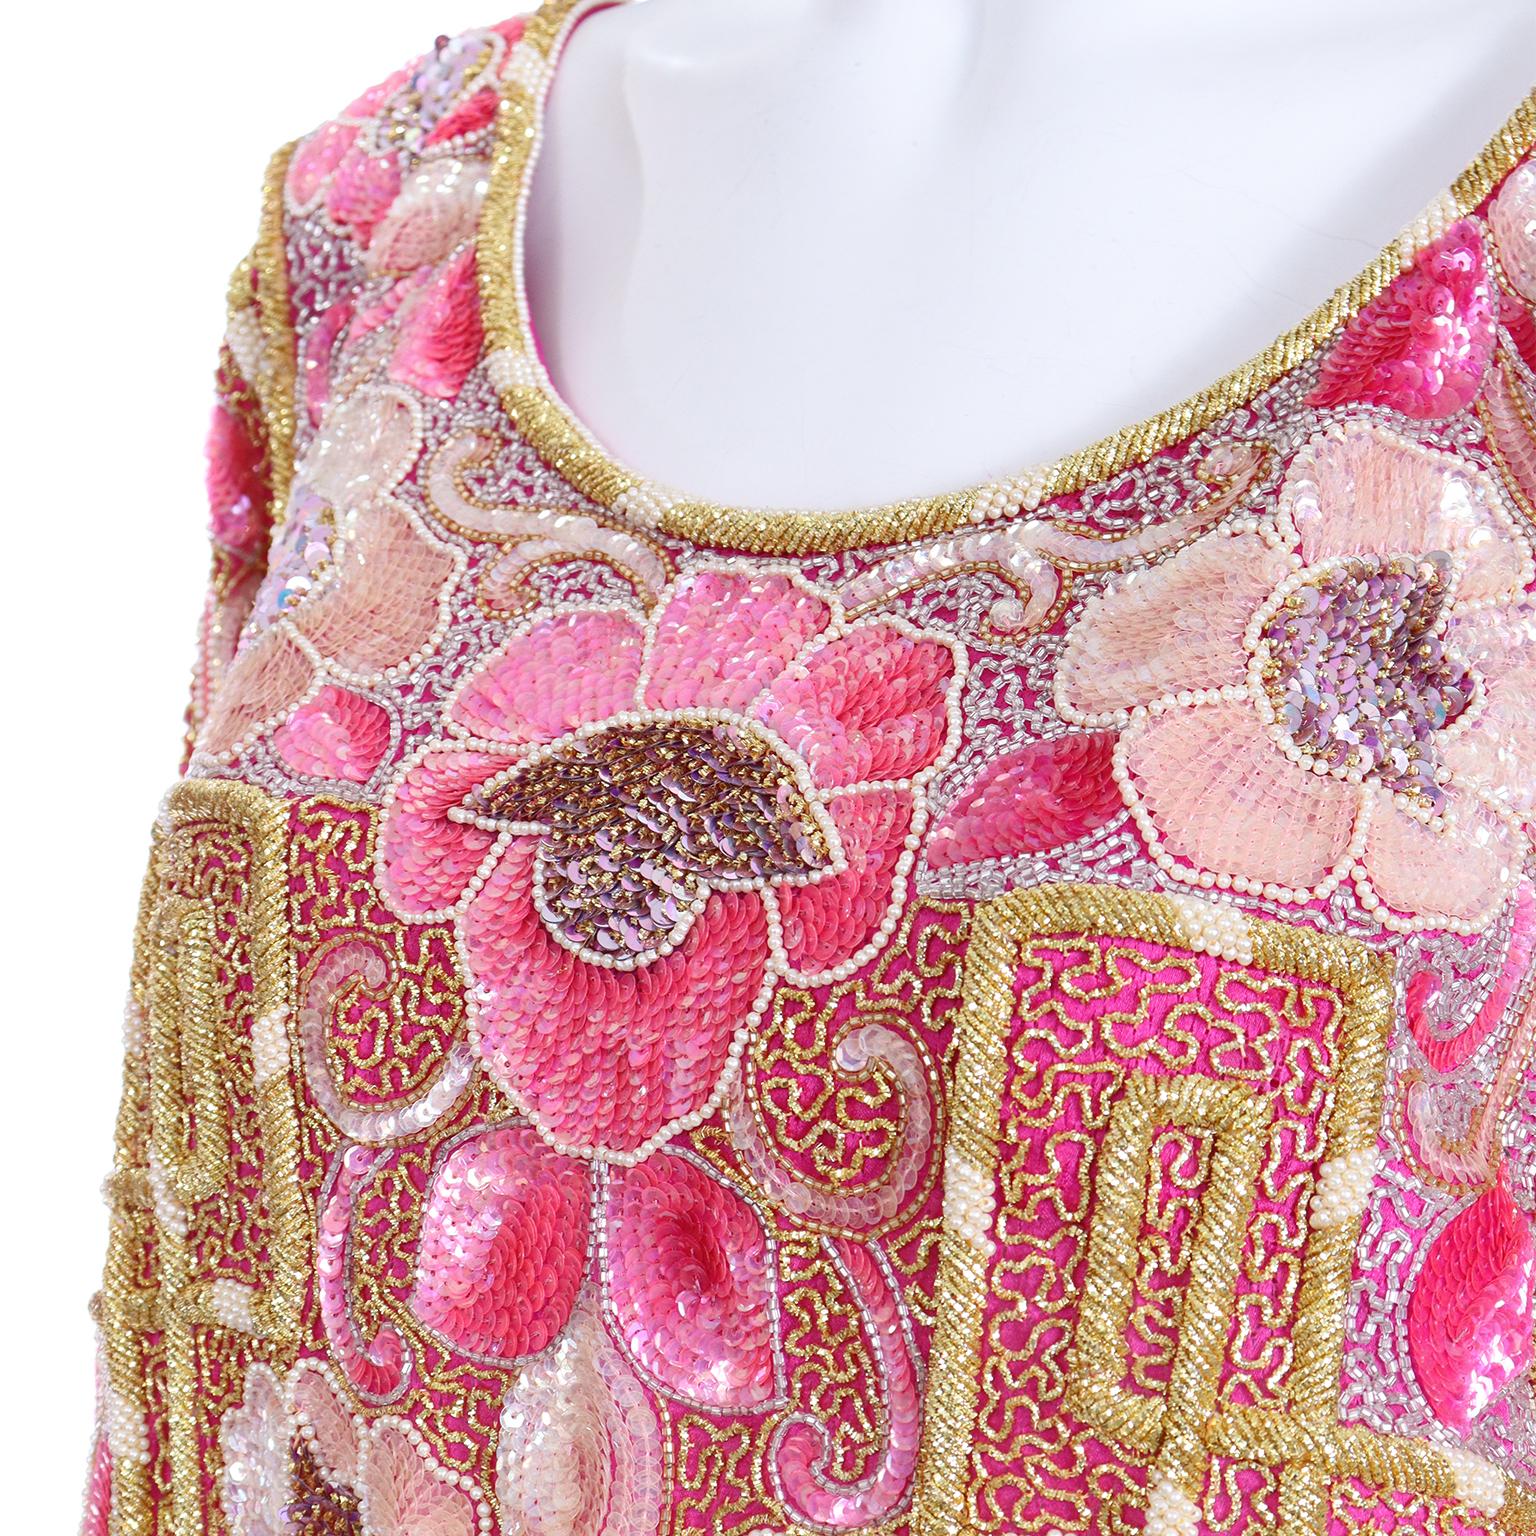 Women's Vintage Floral Hot Pink Caftan Dress With Raised Gold Metallic Beading & Sequins